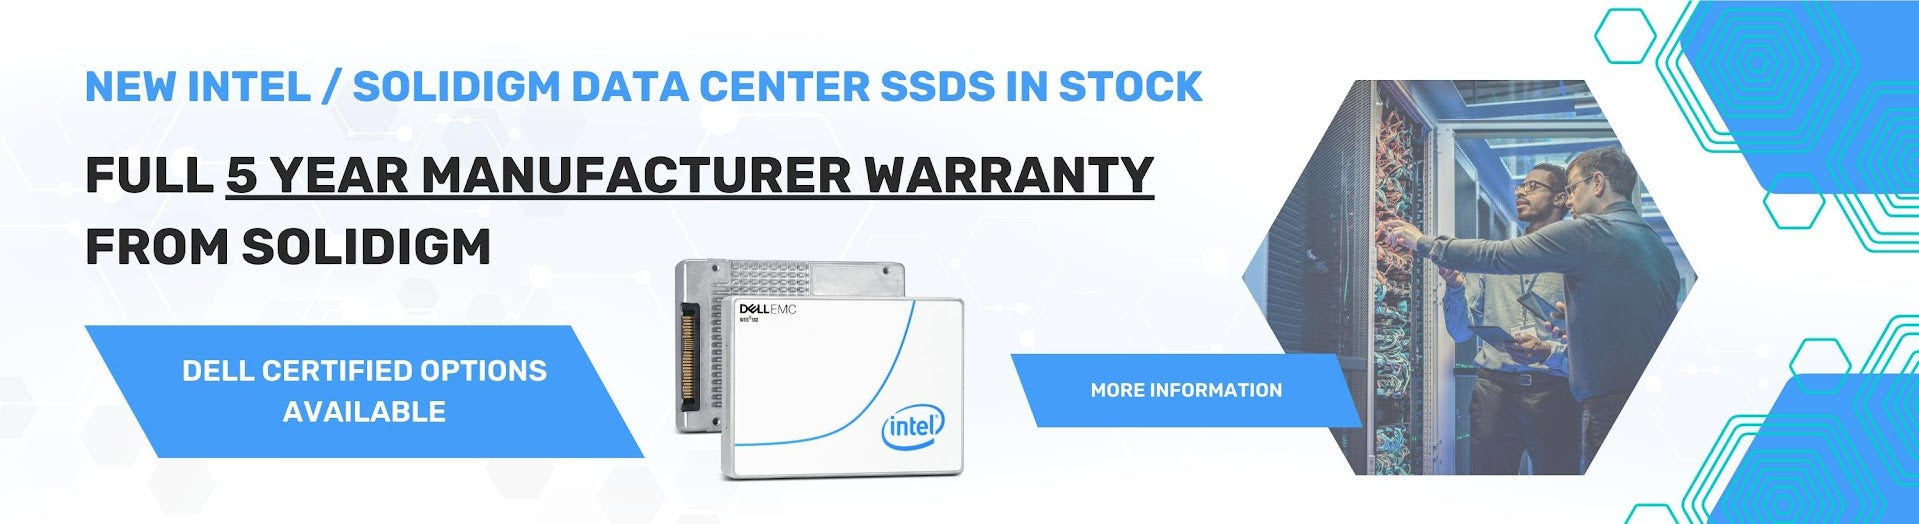 Factory Sealed Intel / Solidigm Data Center SSDs with Manufacturer Warranty